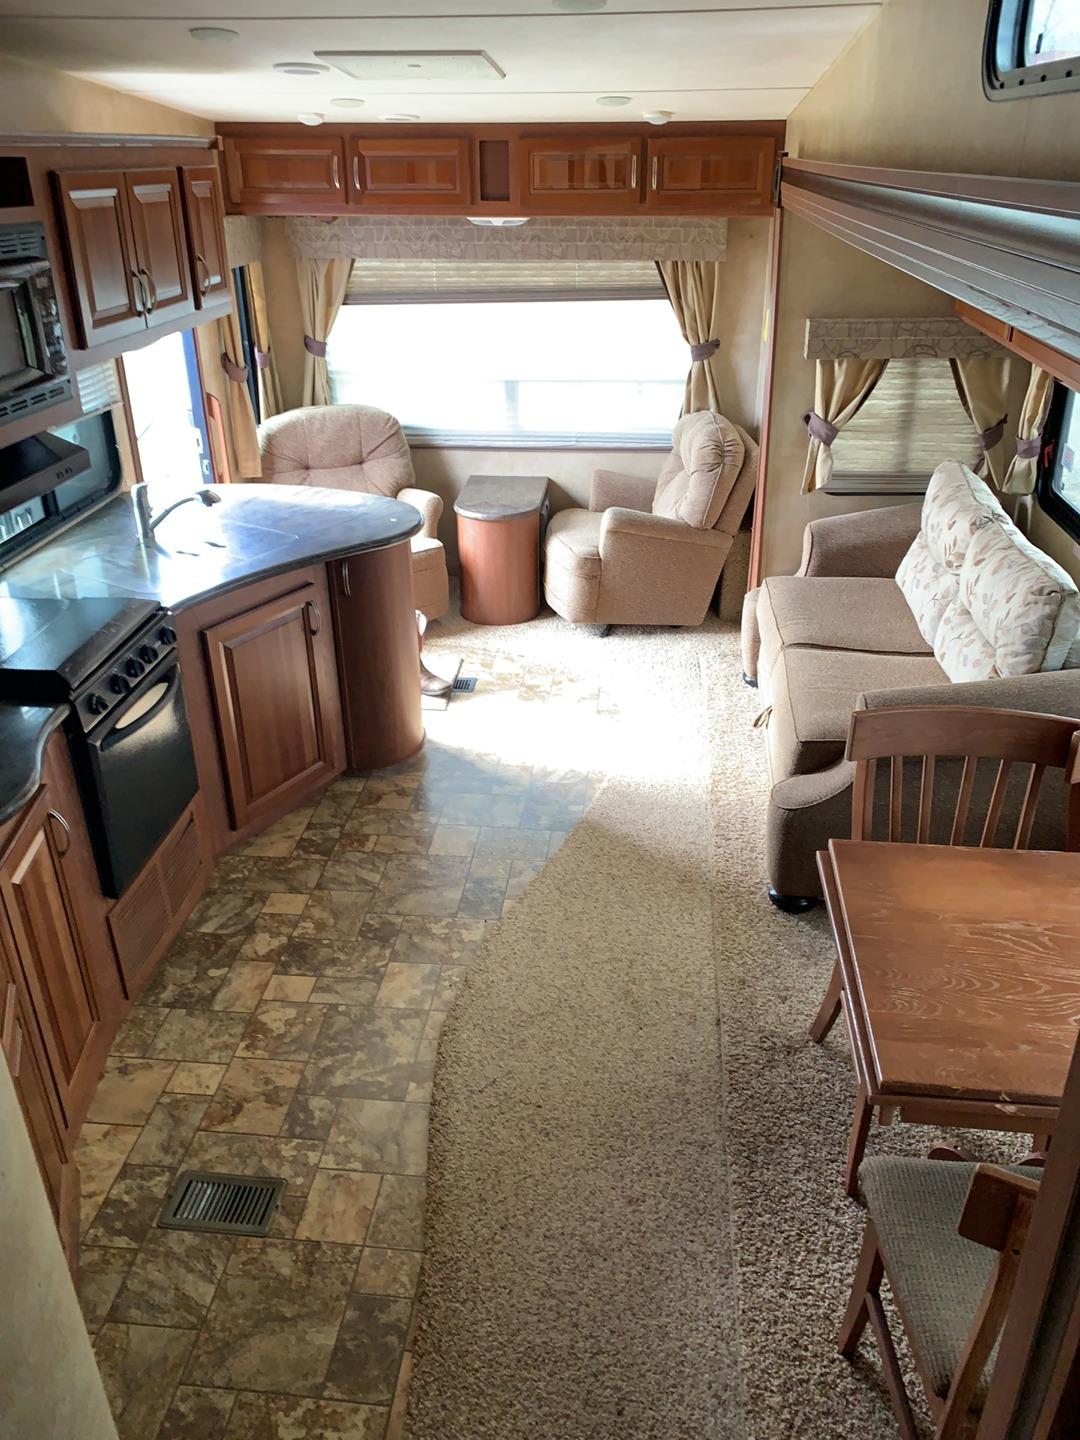 2012 Forest River- Wild Cat Sterling Fifth Wheel 33’ Camper Trailer with Two Slide Outs